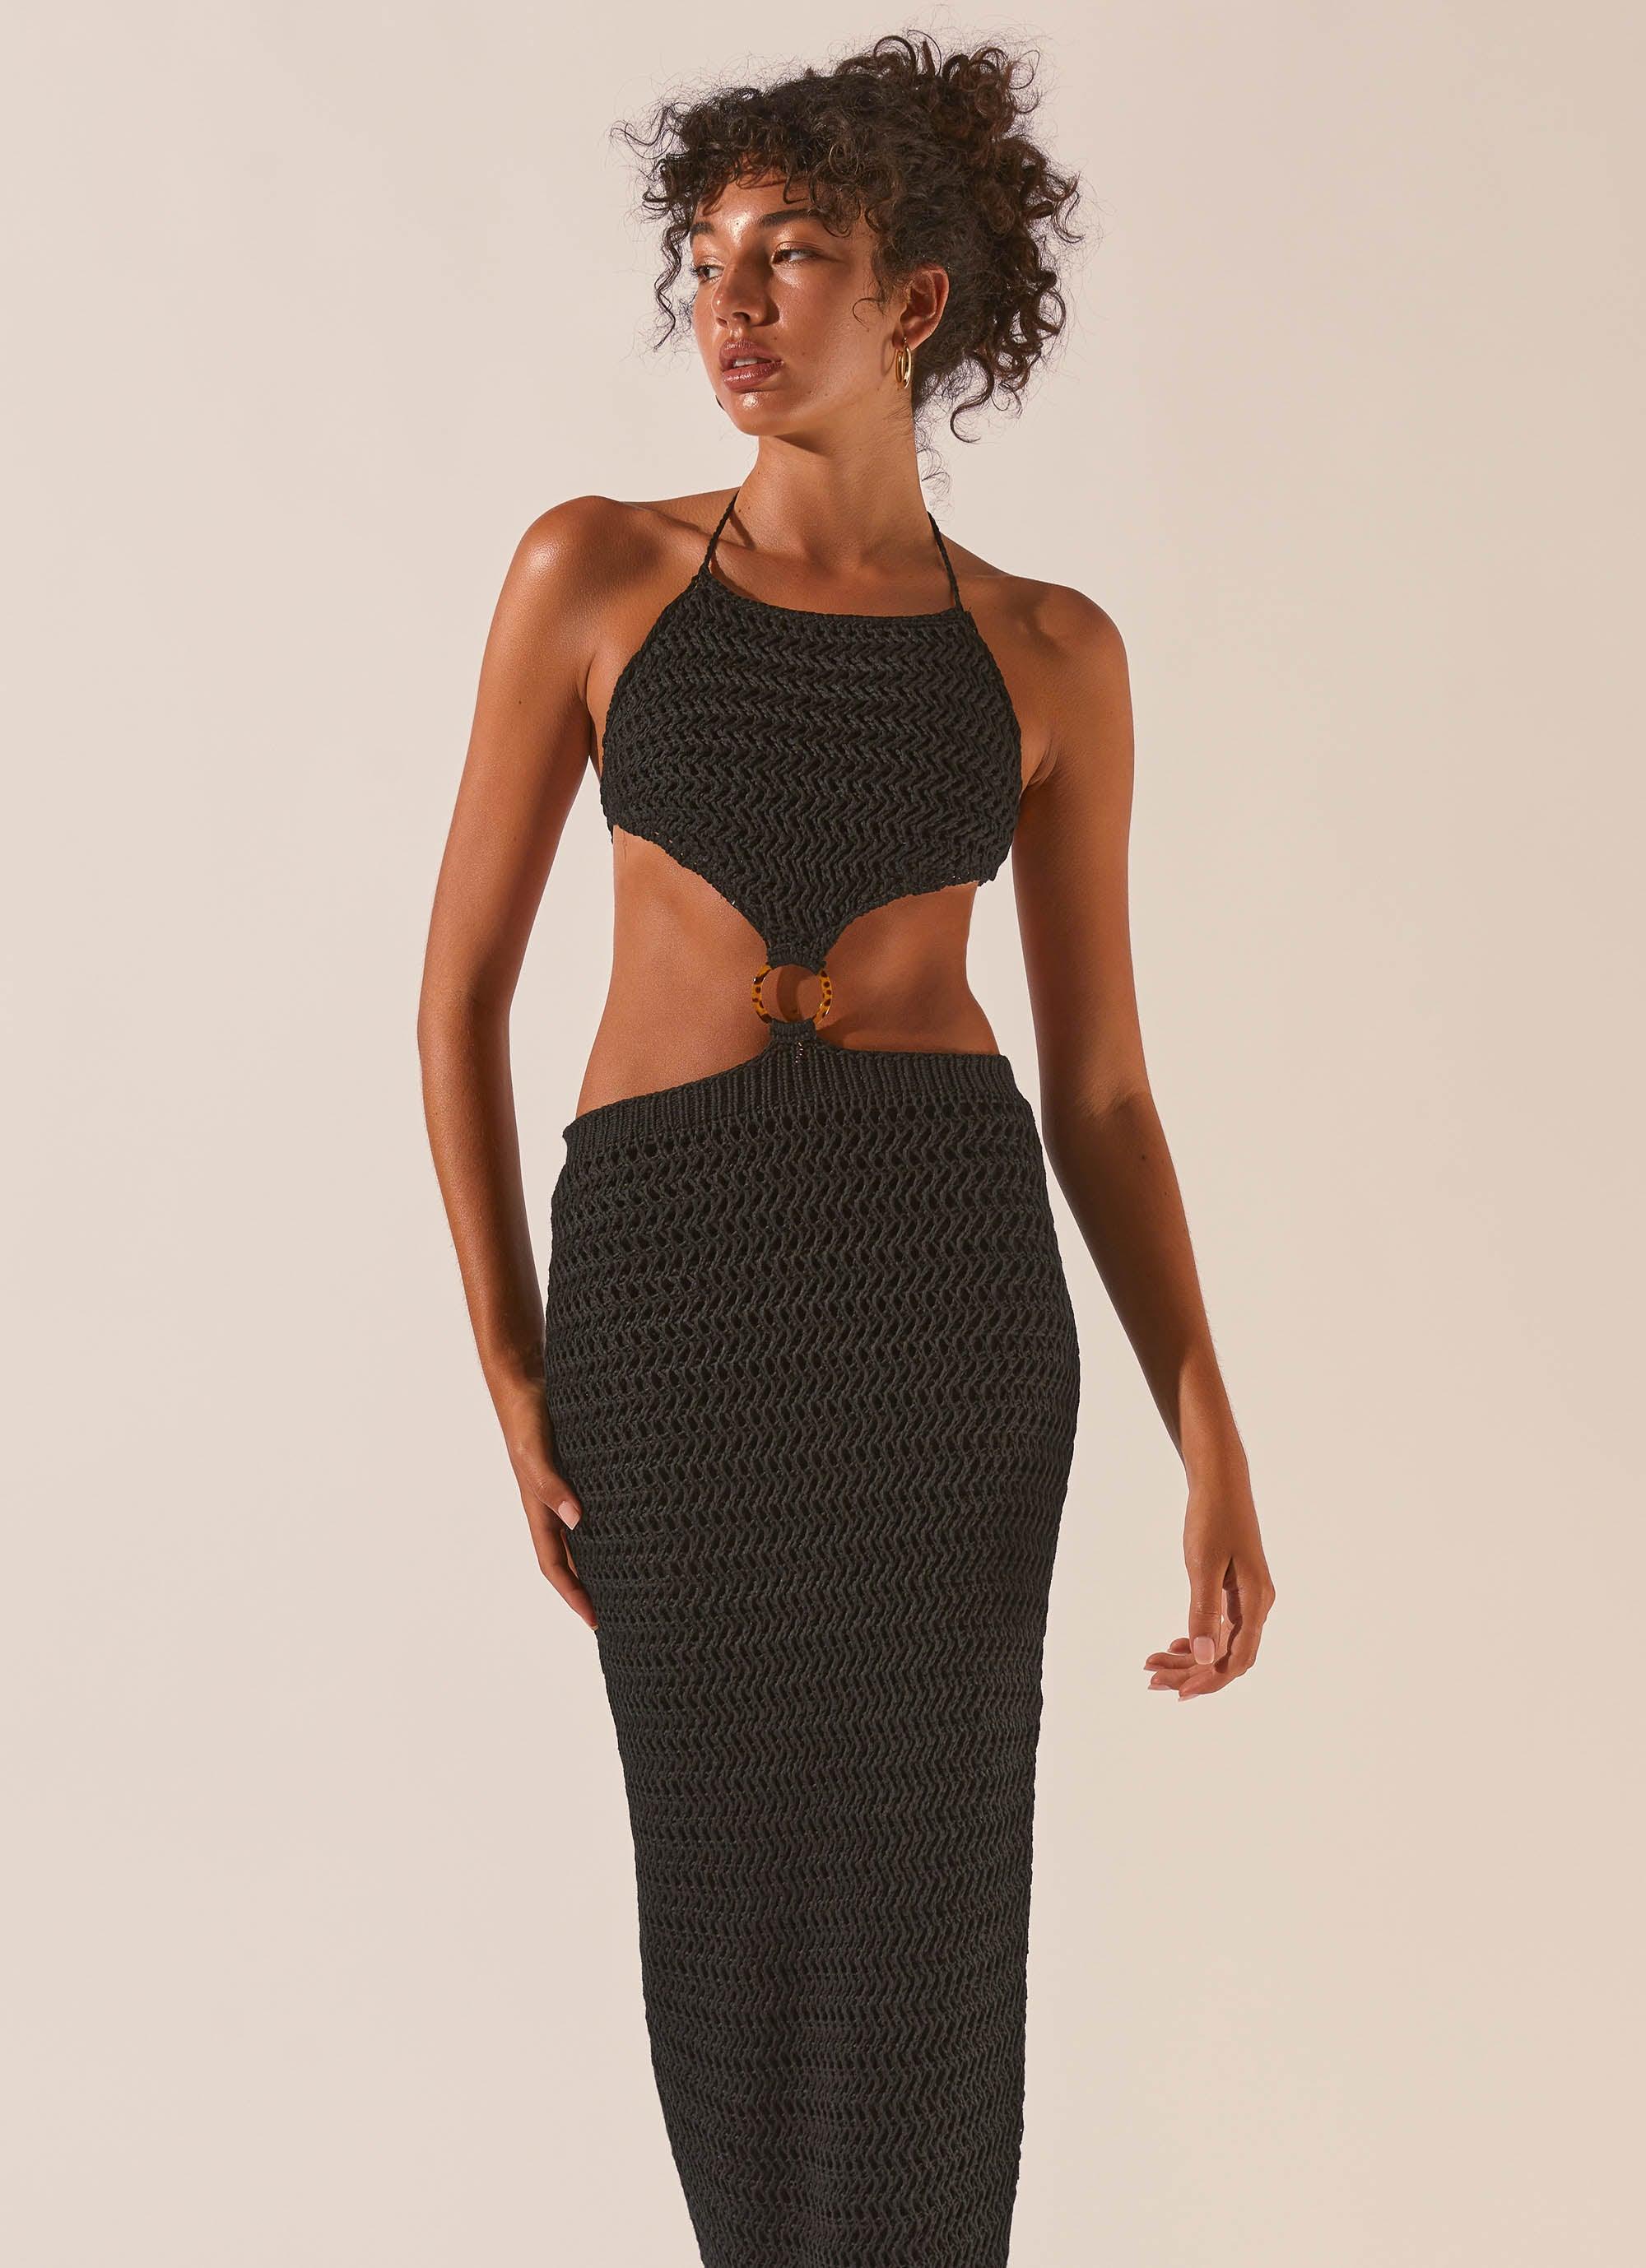 Afternoons In Majorca Crochet Maxi Dress – Black Sand